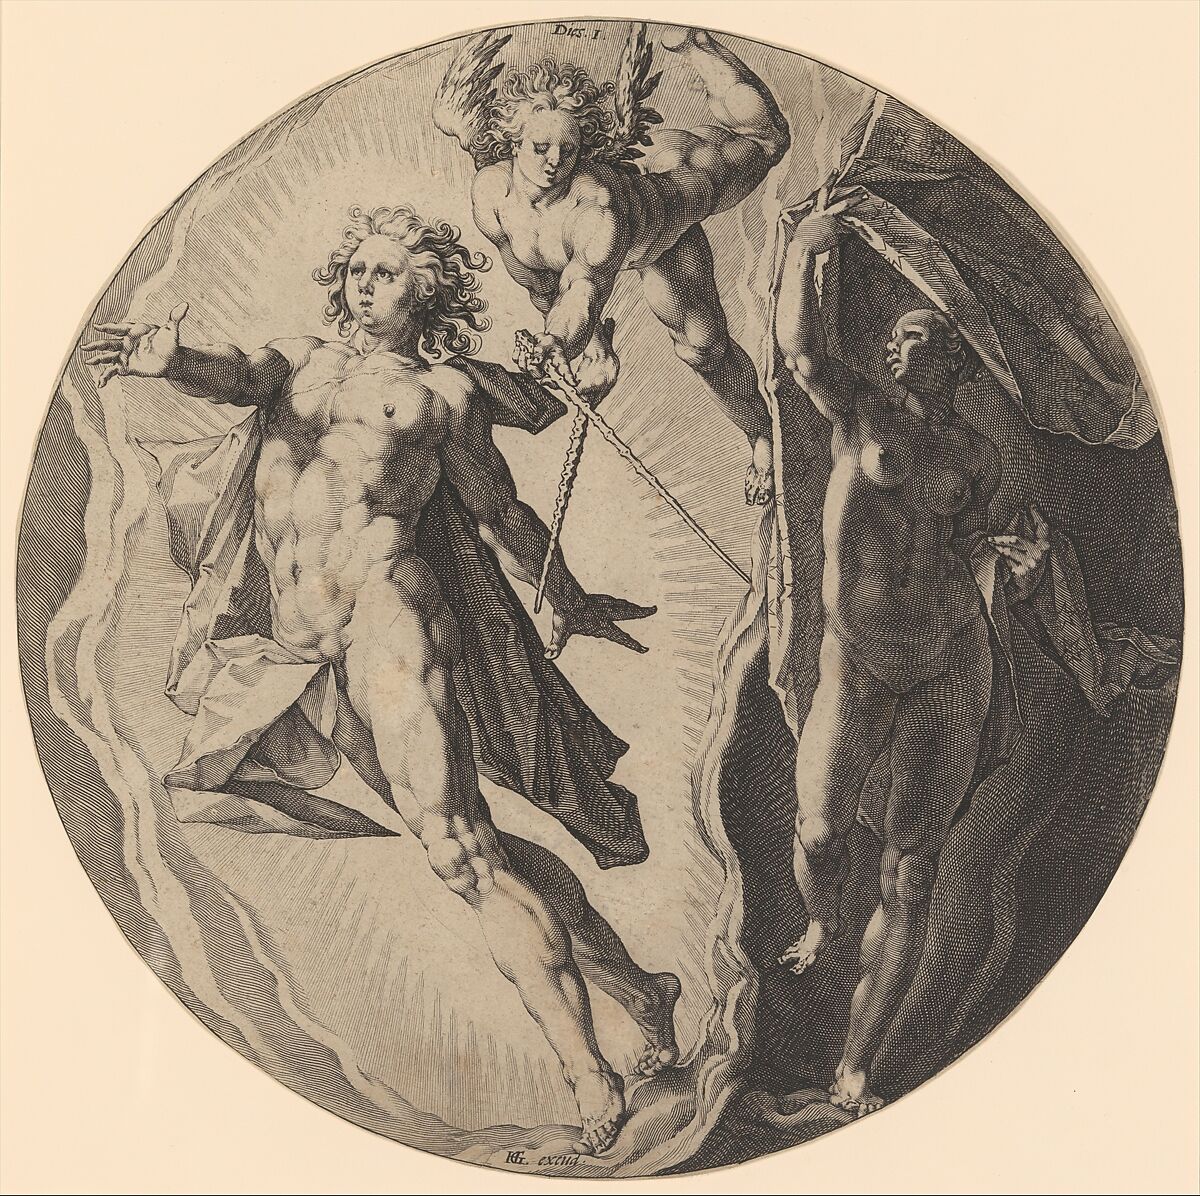 The First Day (Dies I): The Separation of Darkness and Light, plate 1 from "The Creation of the World", Jan Muller (Netherlandish, Amsterdam 1571–1628 Amsterdam), Engraving; New Holl.'s second state of two 